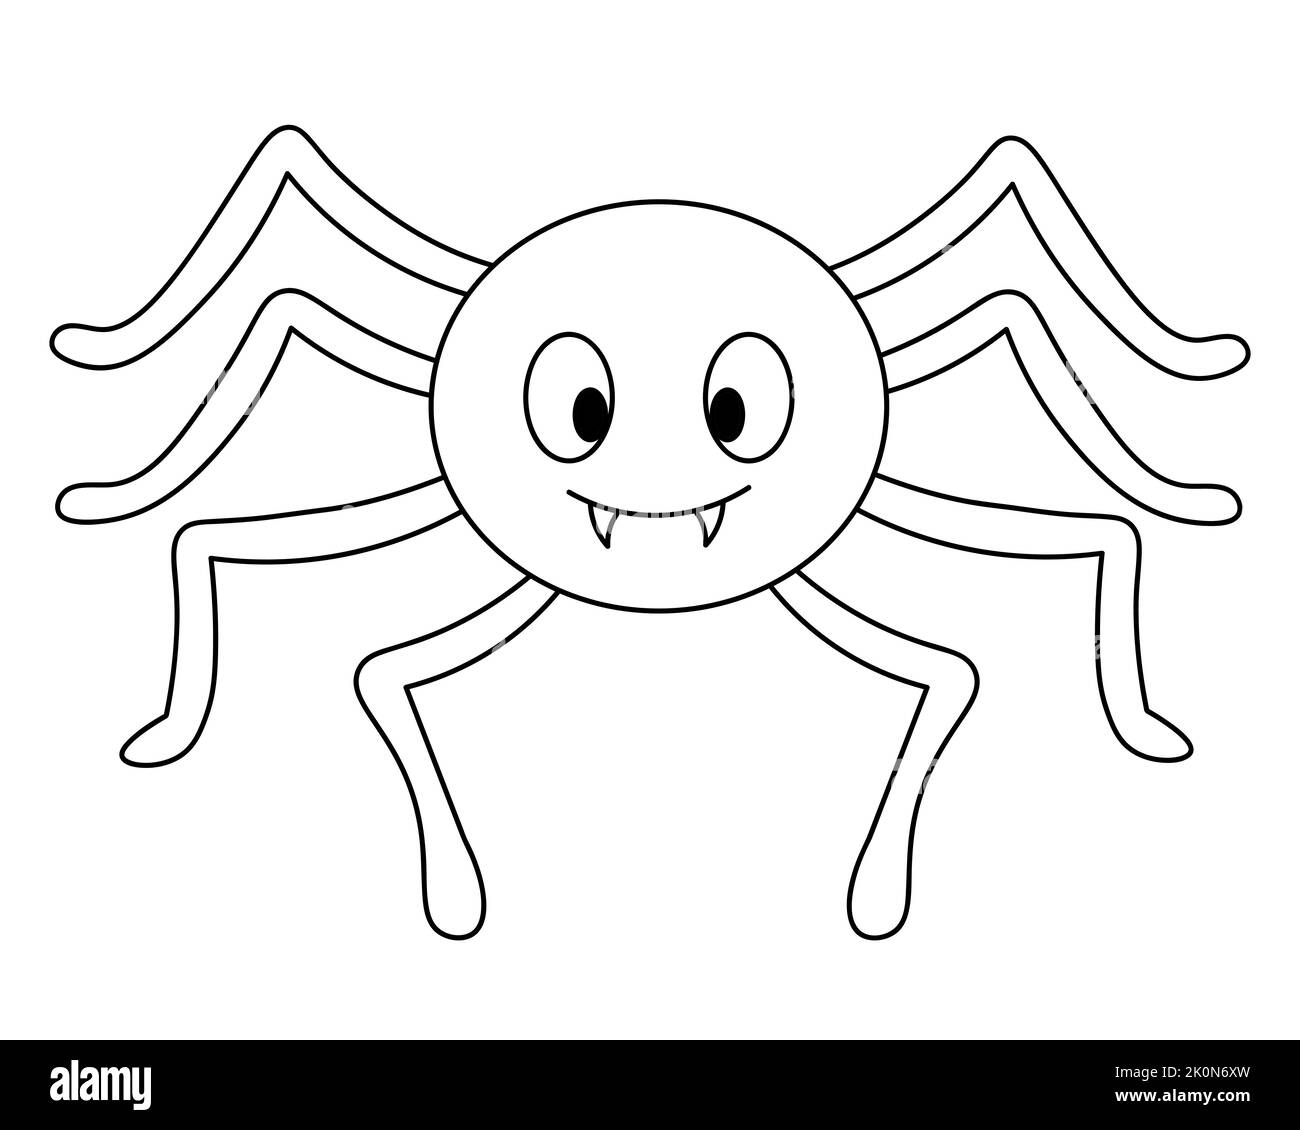 Spider. Vector illustration. Outline on an isolated white background. Doodle style. Coloring book for children. Sketch. Cute toothy. Halloween symbol. Stock Vector